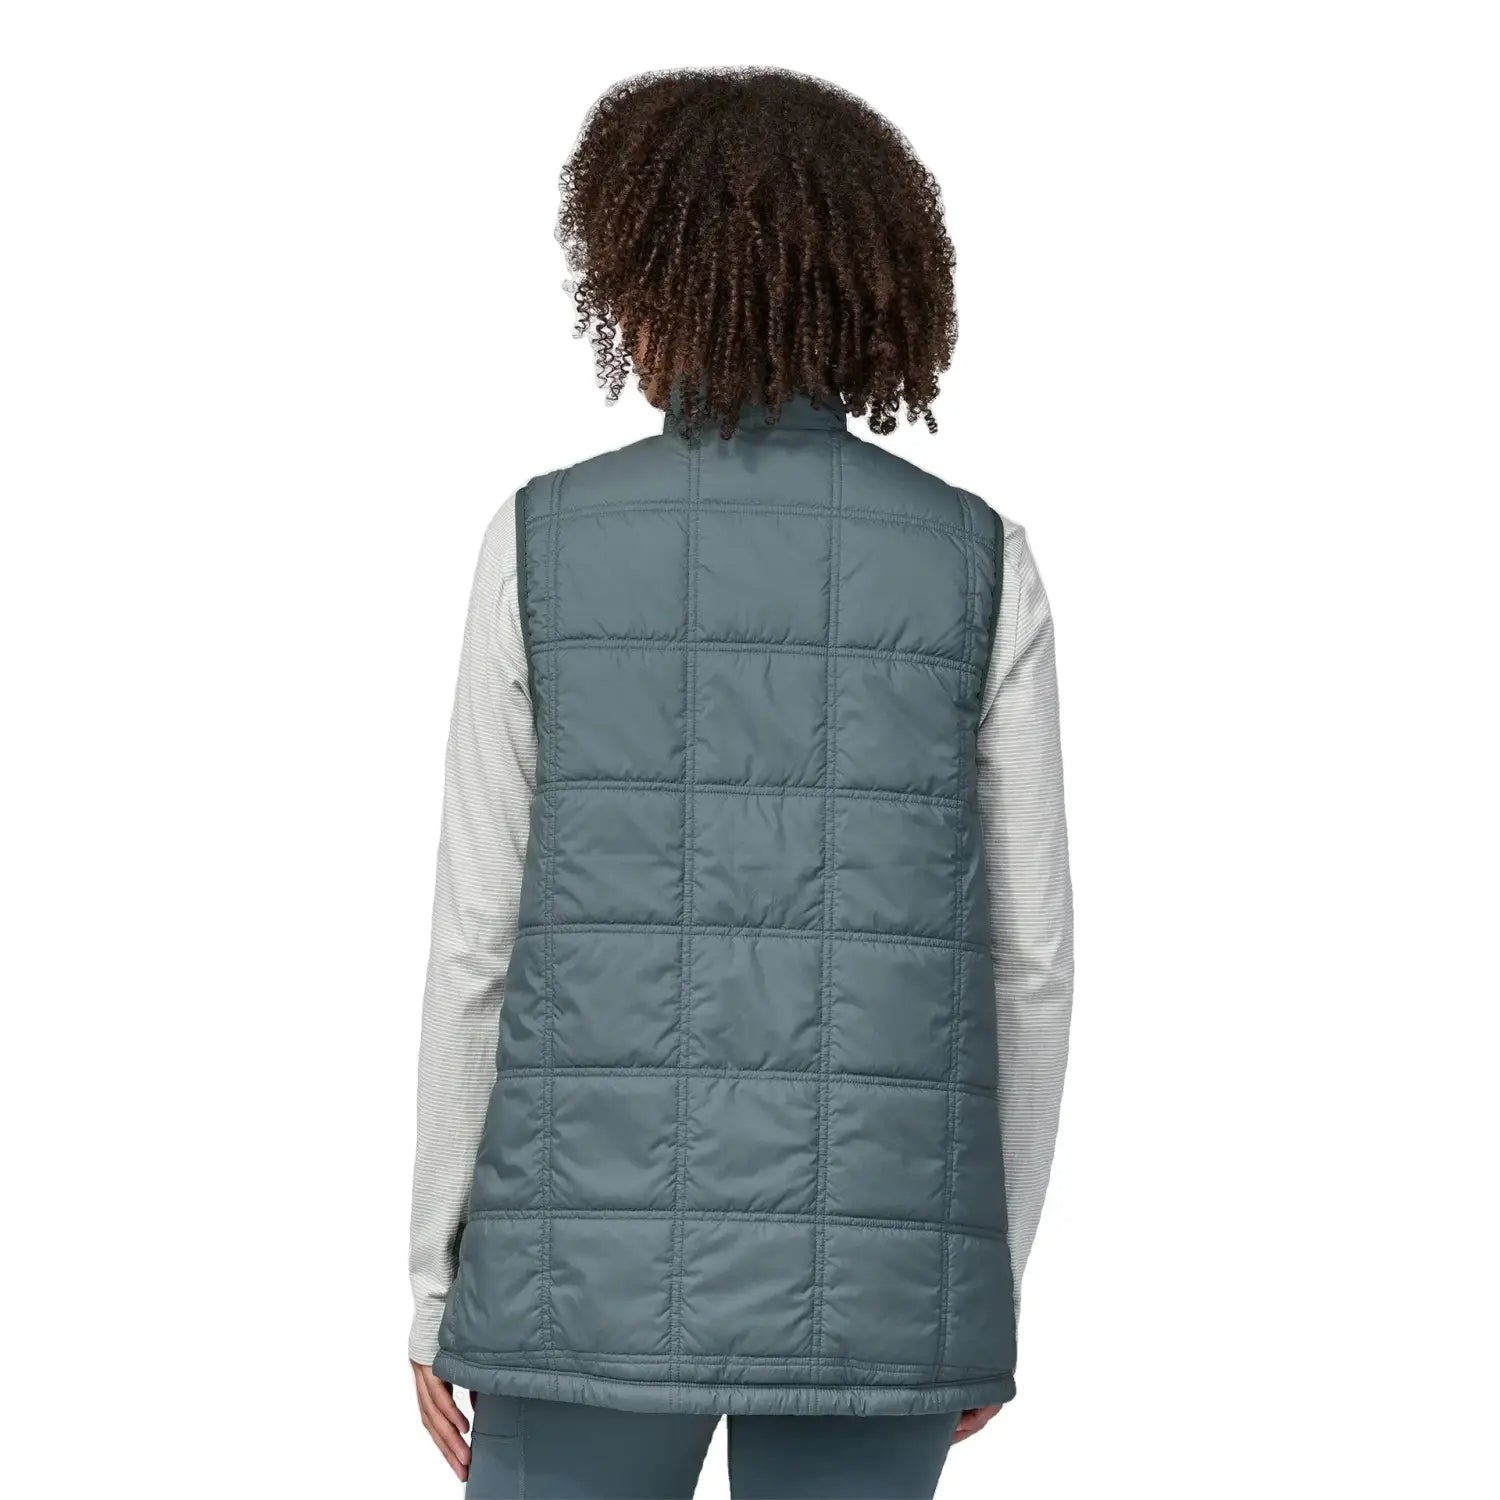 Patagonia W's Lost Canyon Vest, Noueveau Green, back view on model